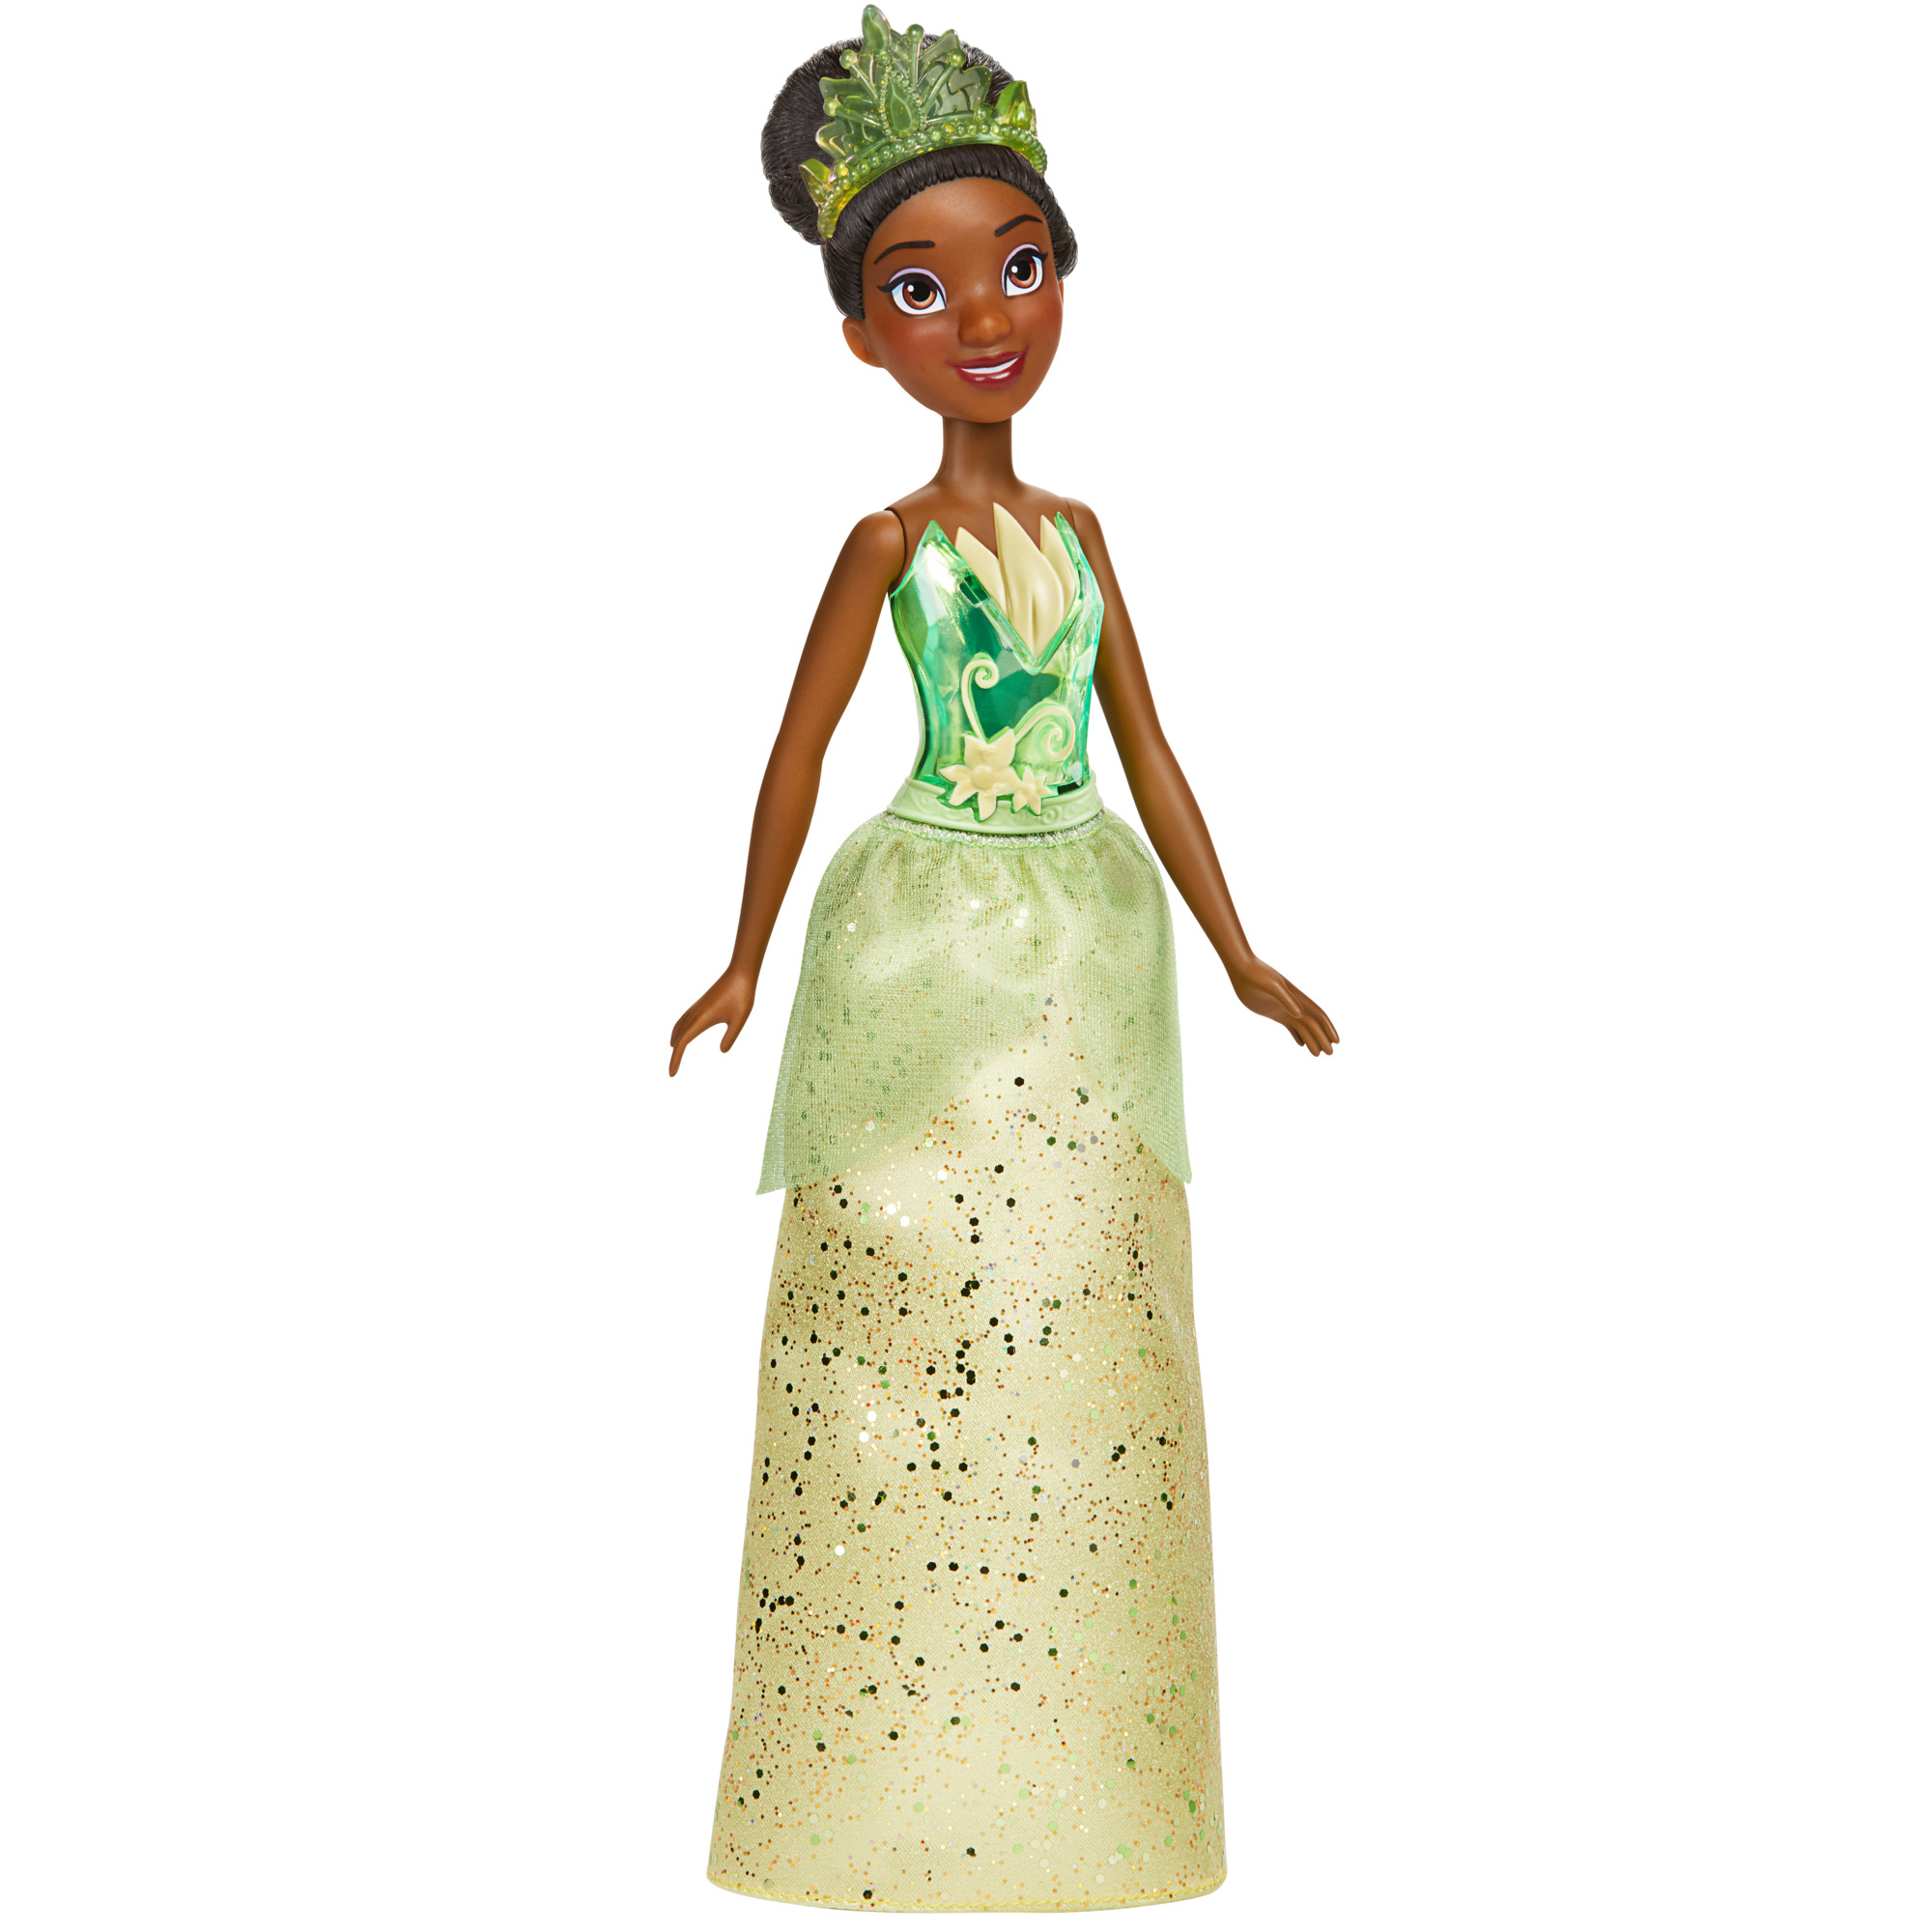 Disney Princess Royal Shimmer Tiana Fashion Doll, Accessories Included - image 1 of 9